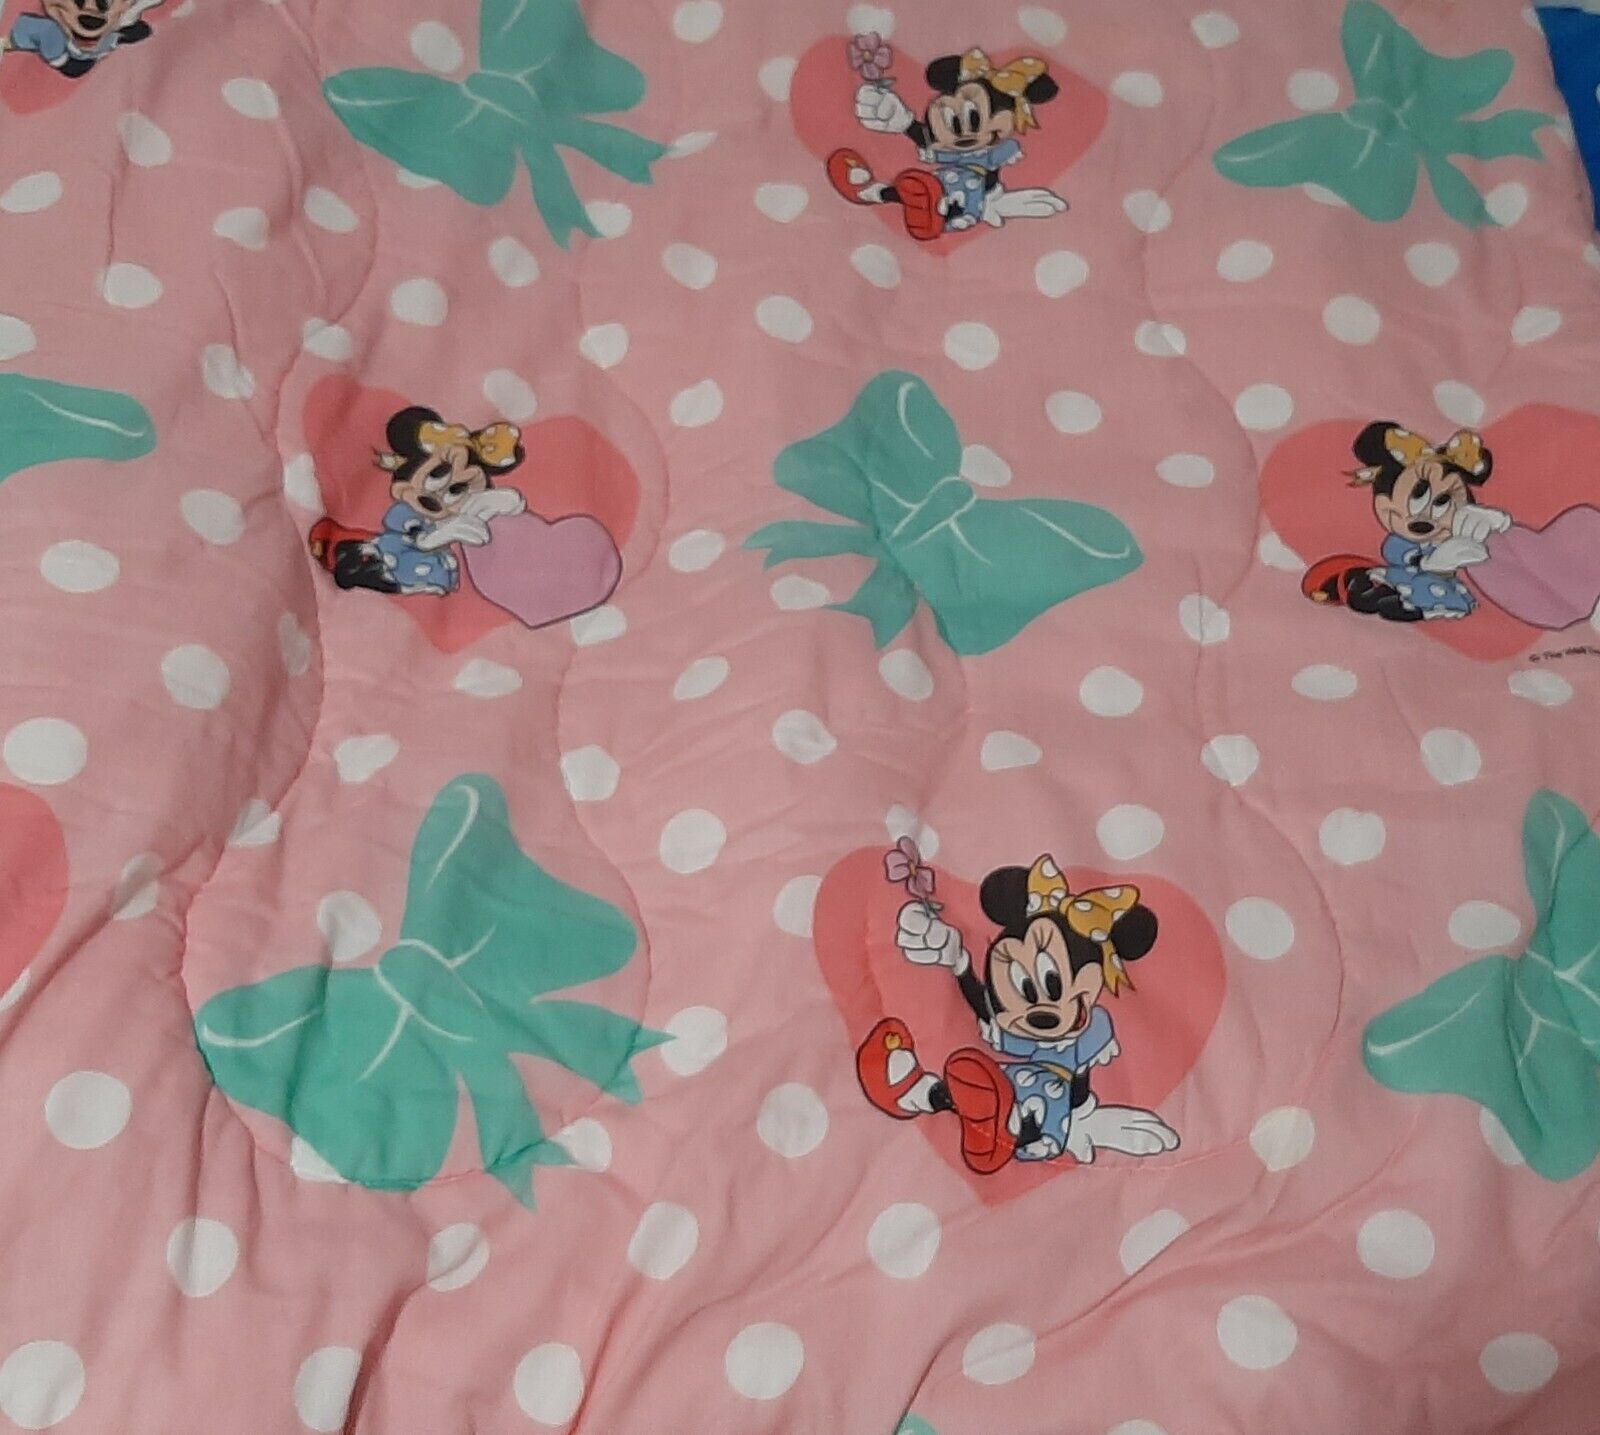 Used Disney Minnie Mouse Vintage Comforter Blanket Polka Dots Full (Has Defects)